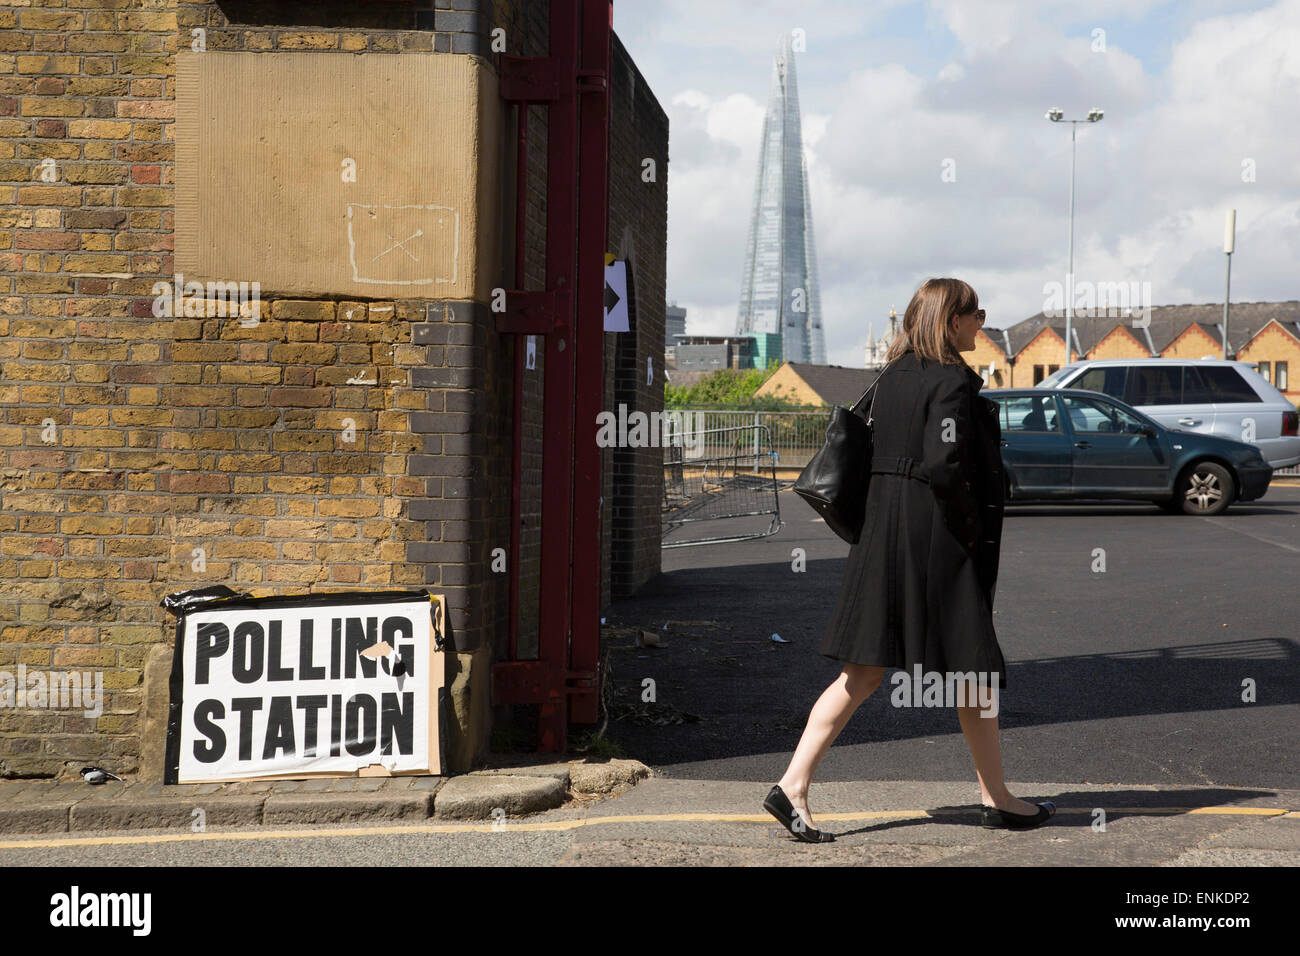 London, UK. Thursday 7th May 2015. Voters attending a polling station at John Orwell Leisure Centre in the constituency of  Poplar and Limehouse in East London on the day of the general election. This is a Labour Party seat, although this electin is set to be one of the most hotly contested in a generation. Stock Photo